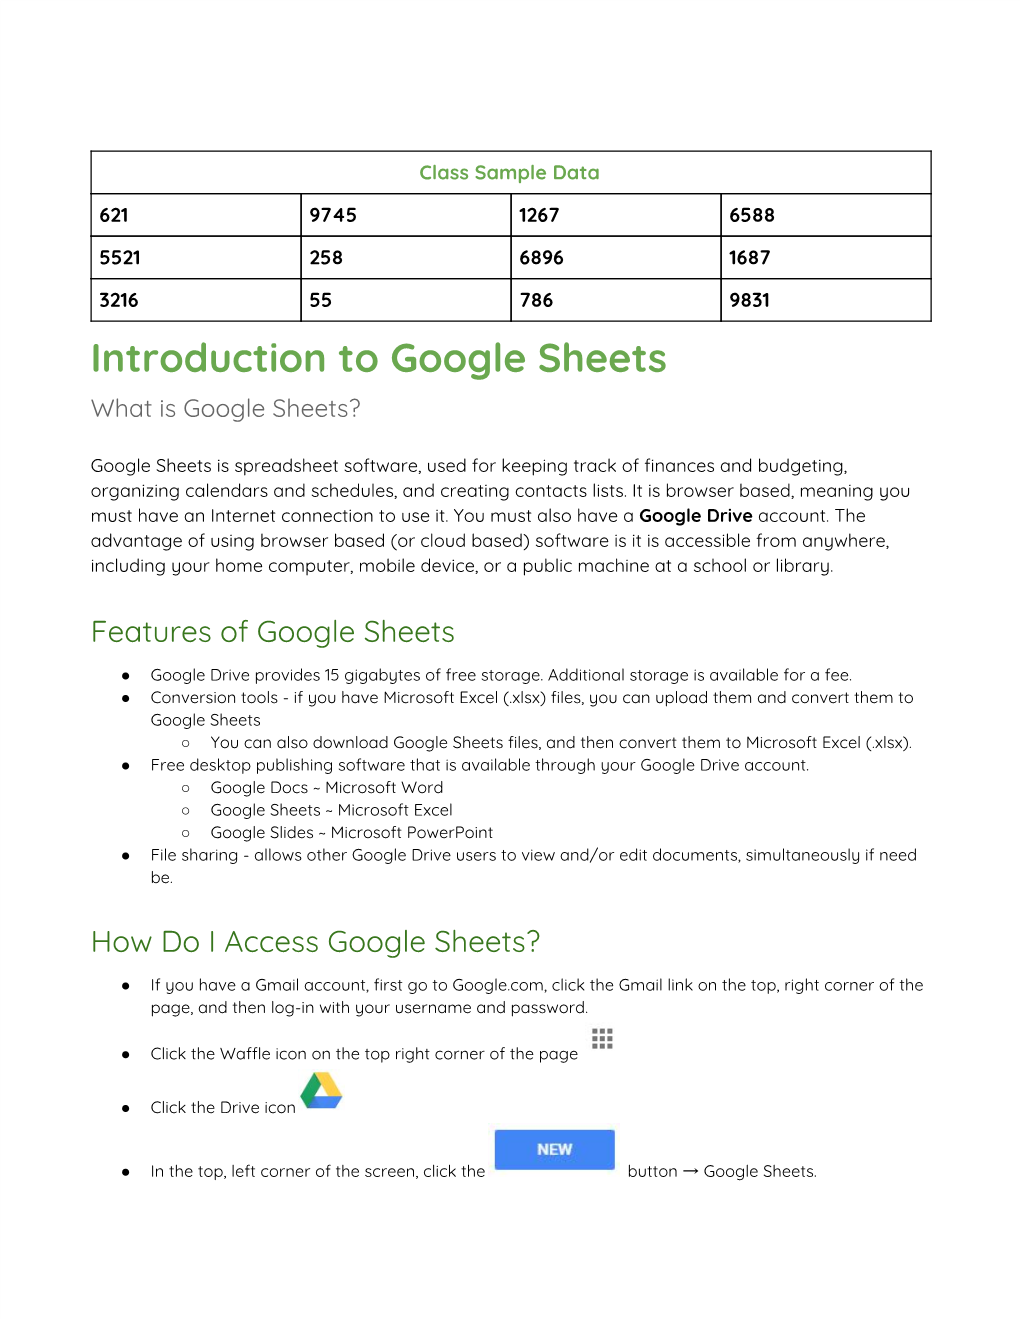 Introduction to Google Sheets What Is Google Sheets?